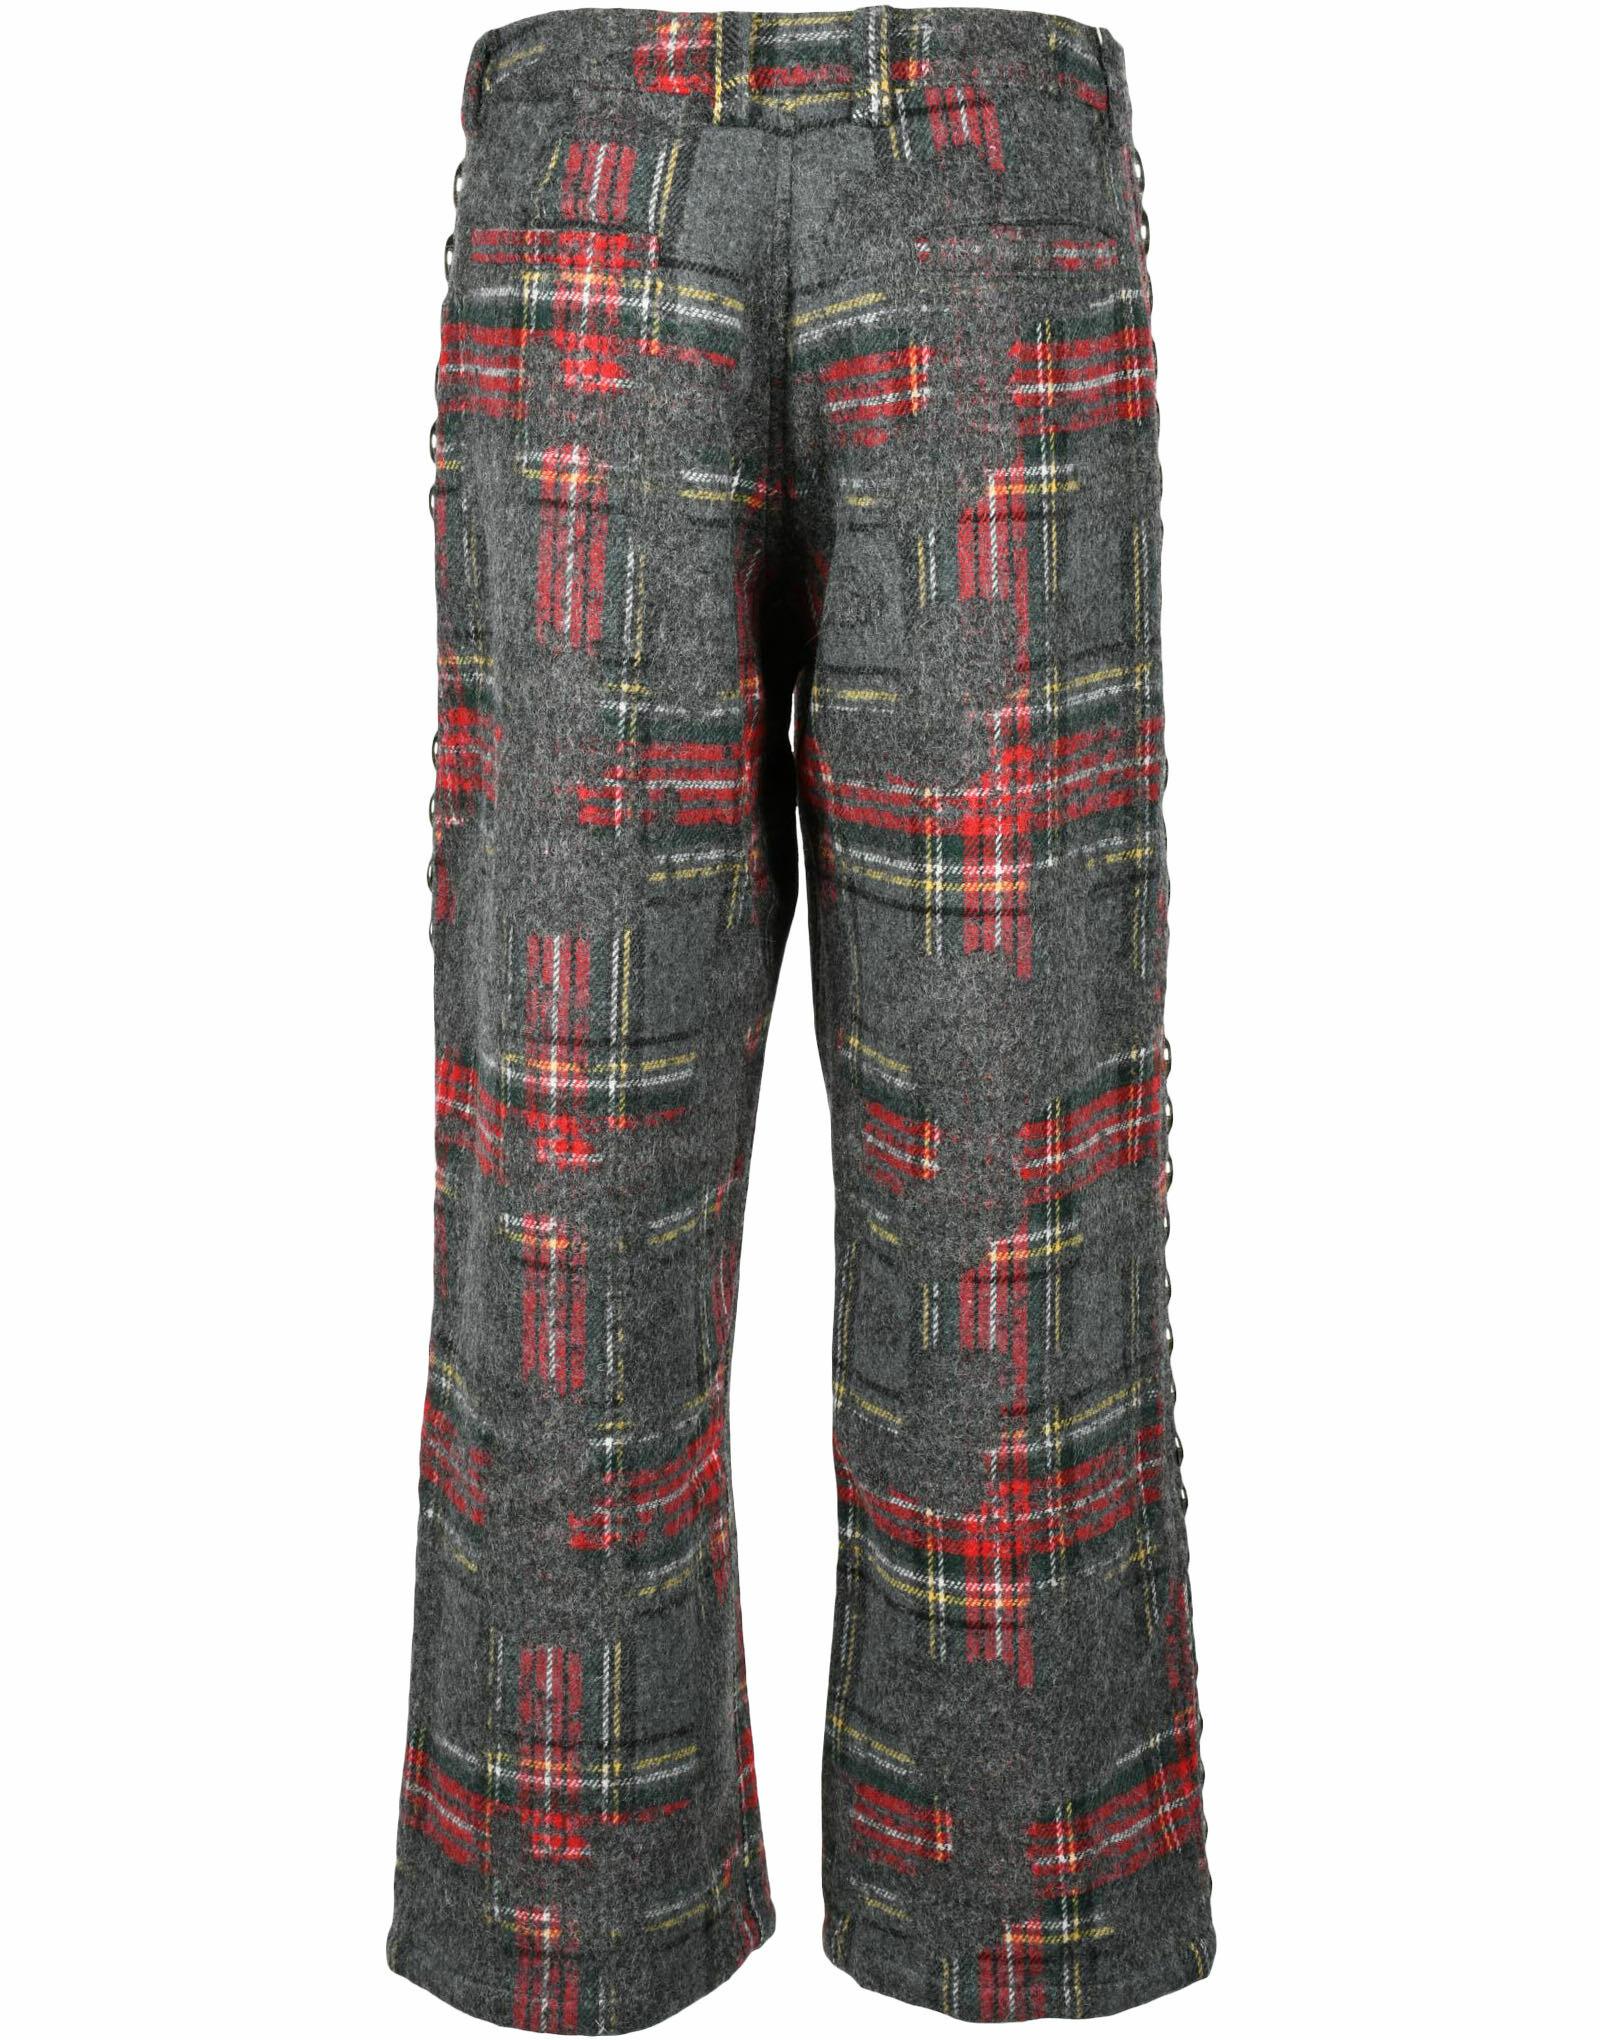 Vaquera Women's Gray/Red Pants 27 IT at FORZIERI